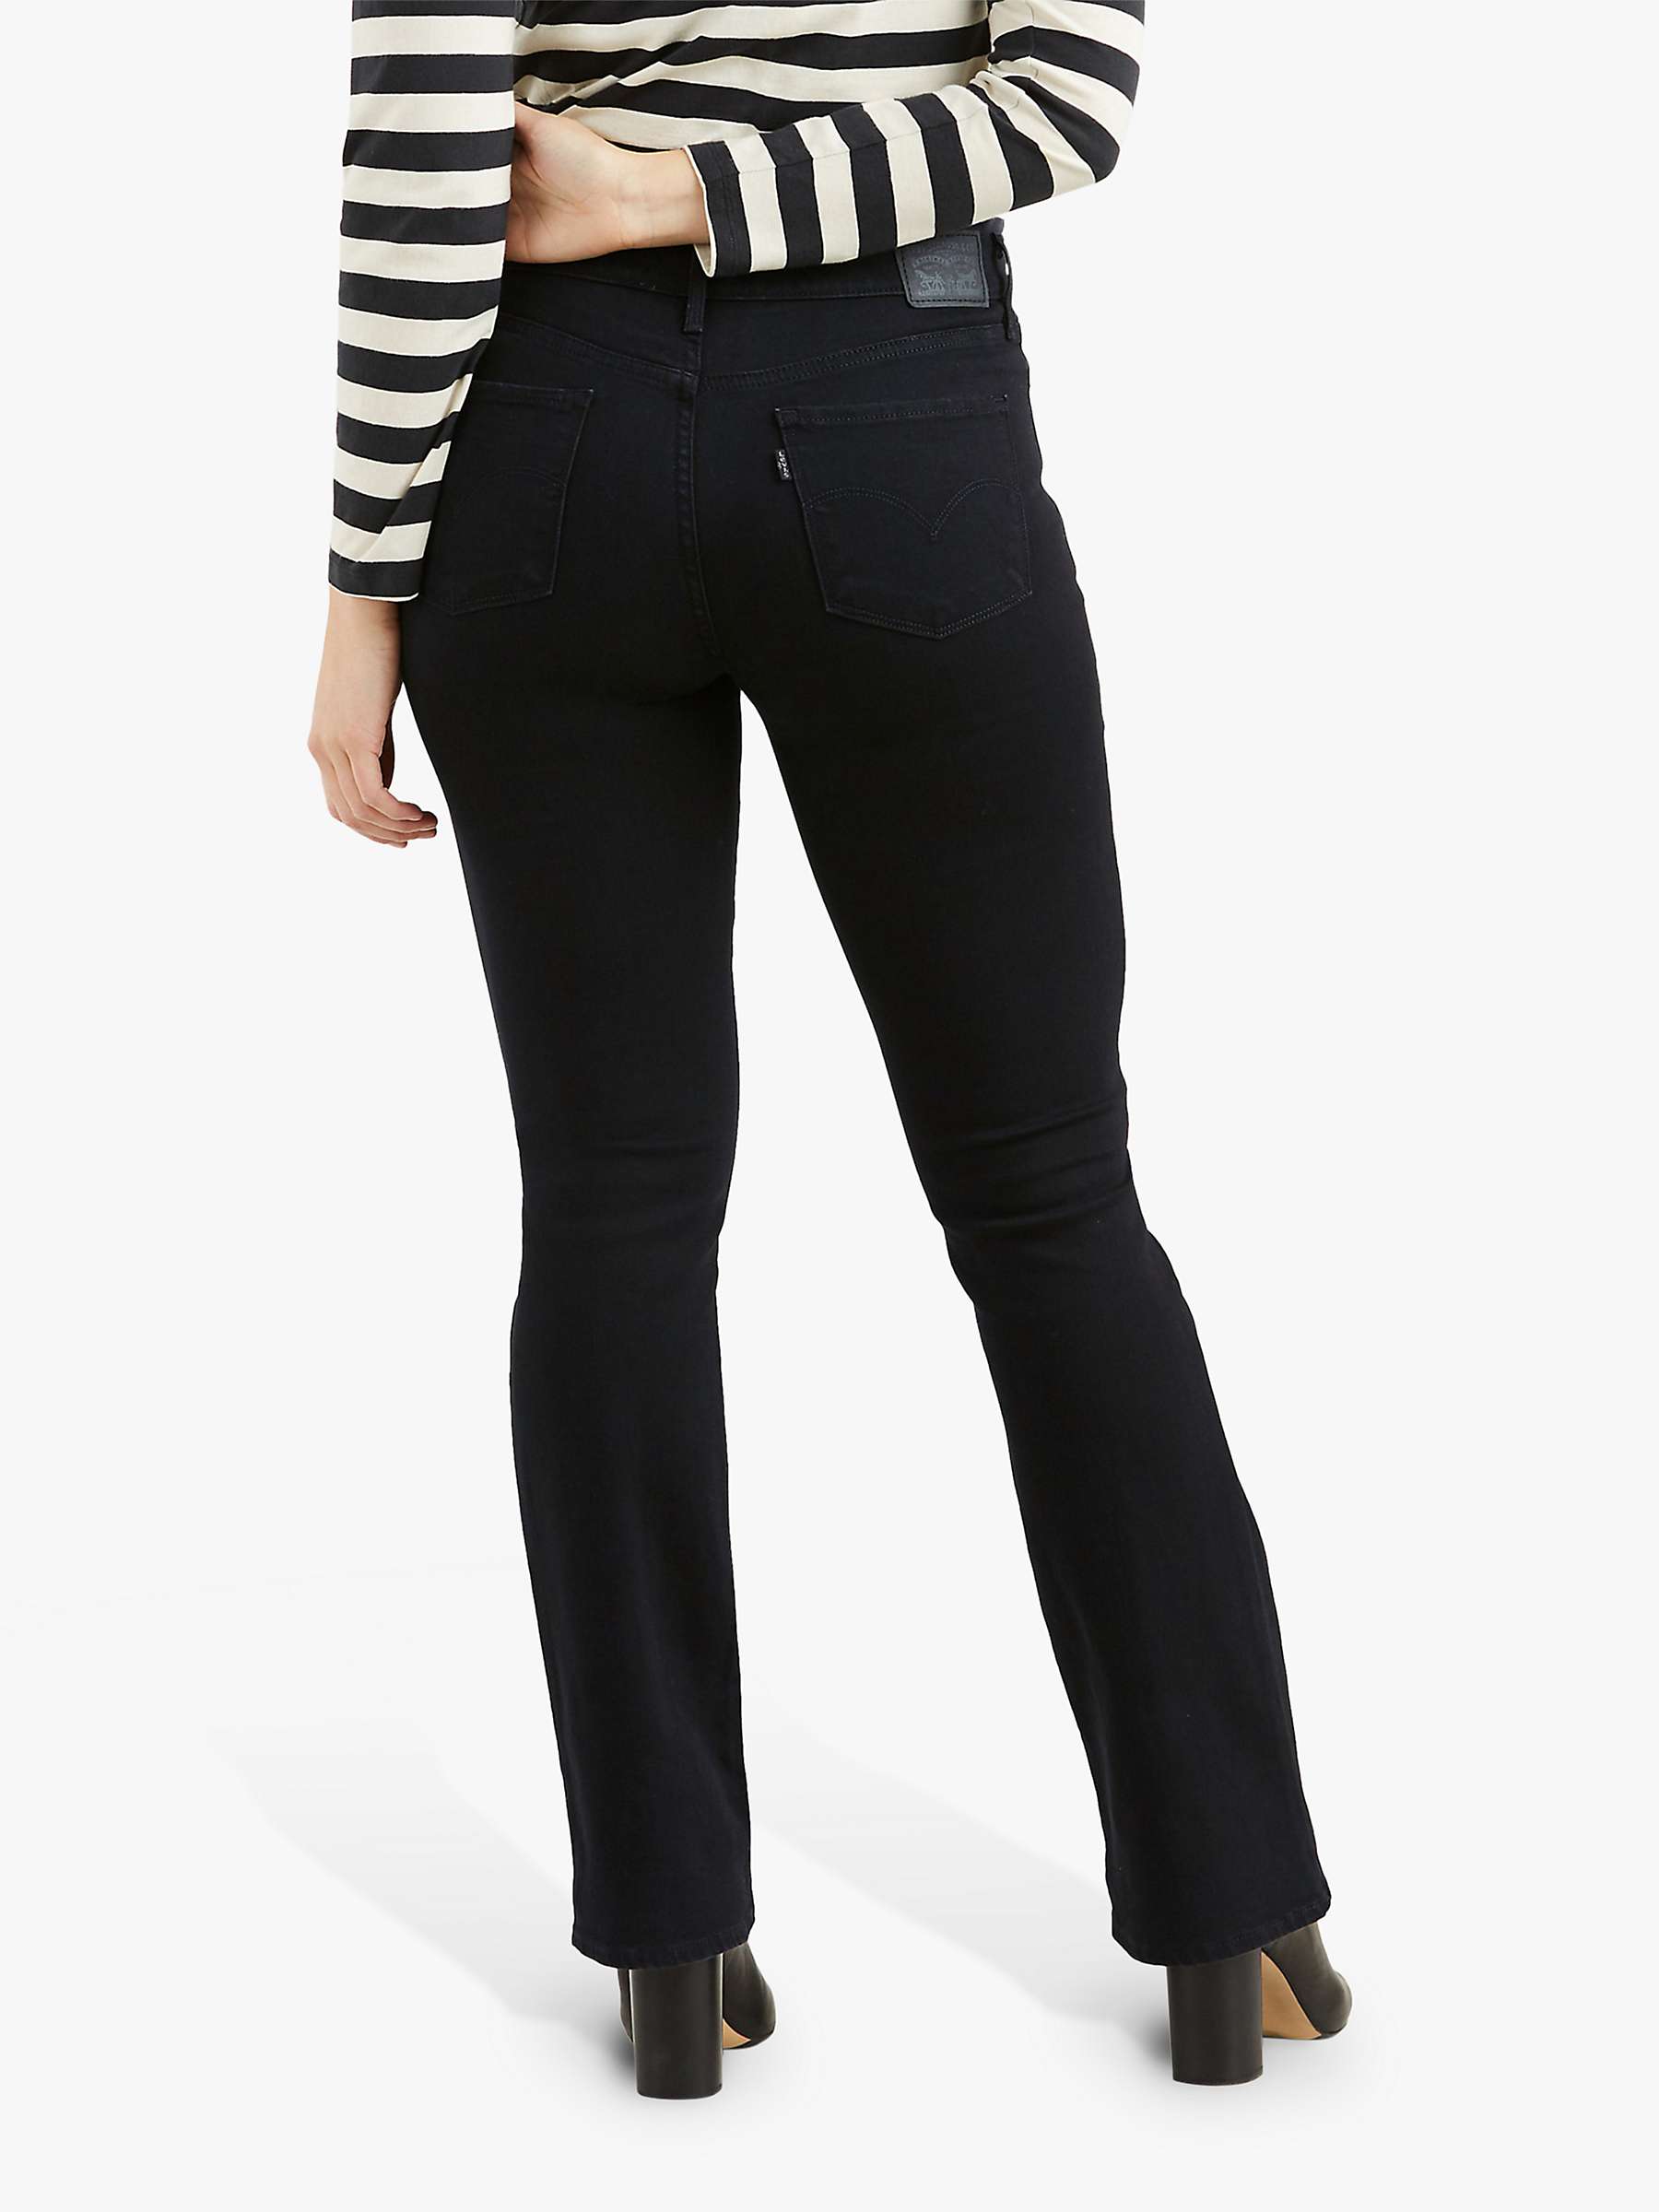 Levi's 315 Shaping Bootcut Jeans, Soft Black at John Lewis & Partners